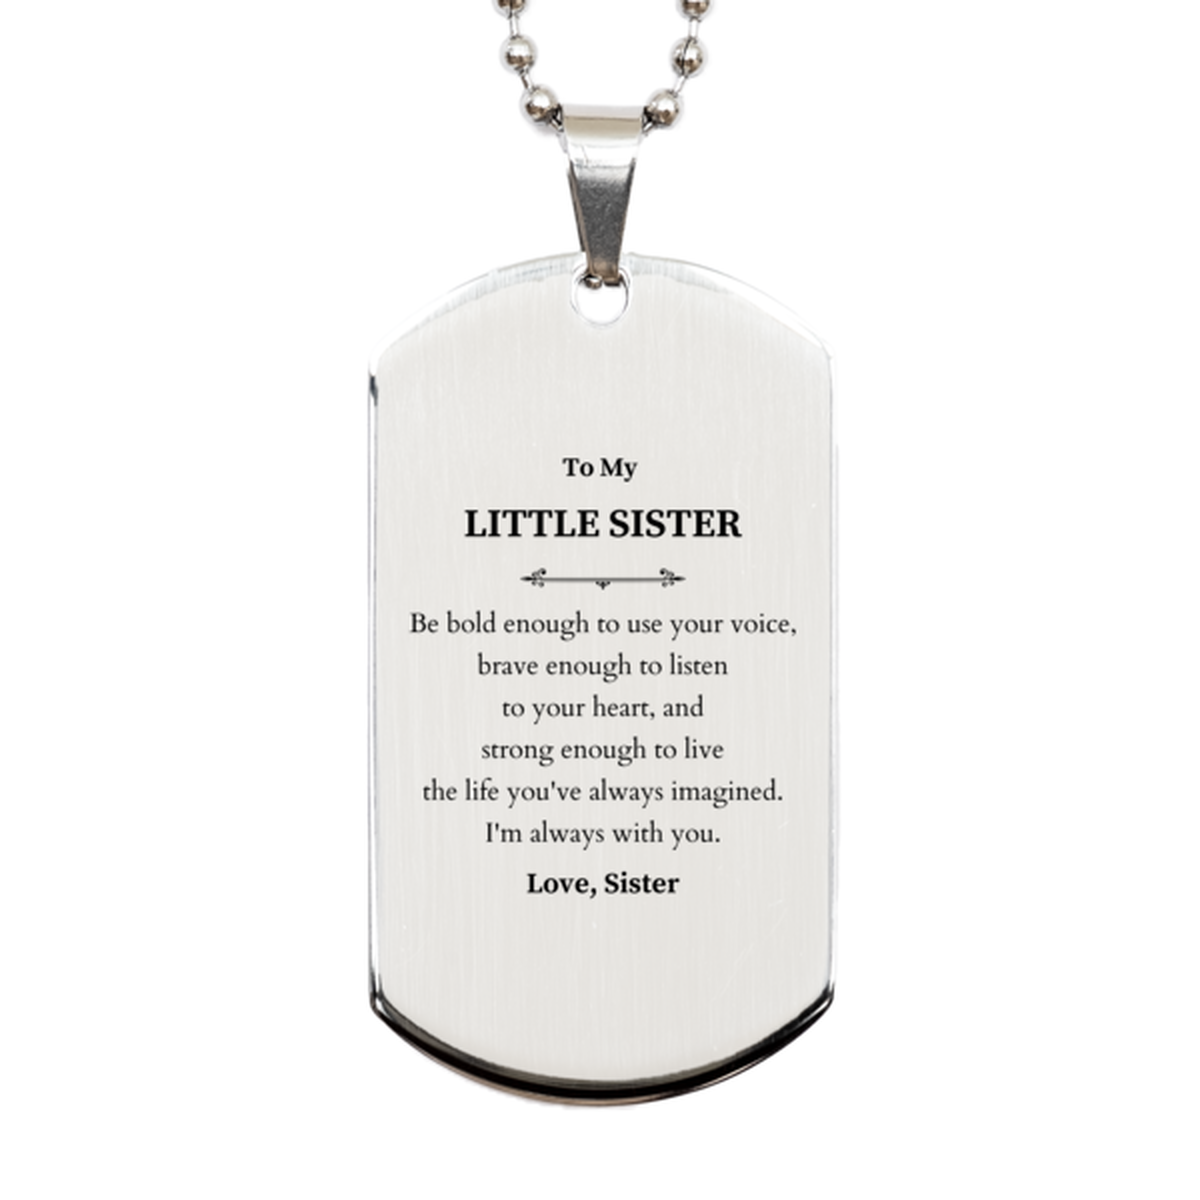 Keepsake Little Sister Silver Dog Tag Gift Idea Graduation Christmas Birthday Little Sister from Sister, Little Sister Be bold enough to use your voice, brave enough to listen to your heart. Love, Sister